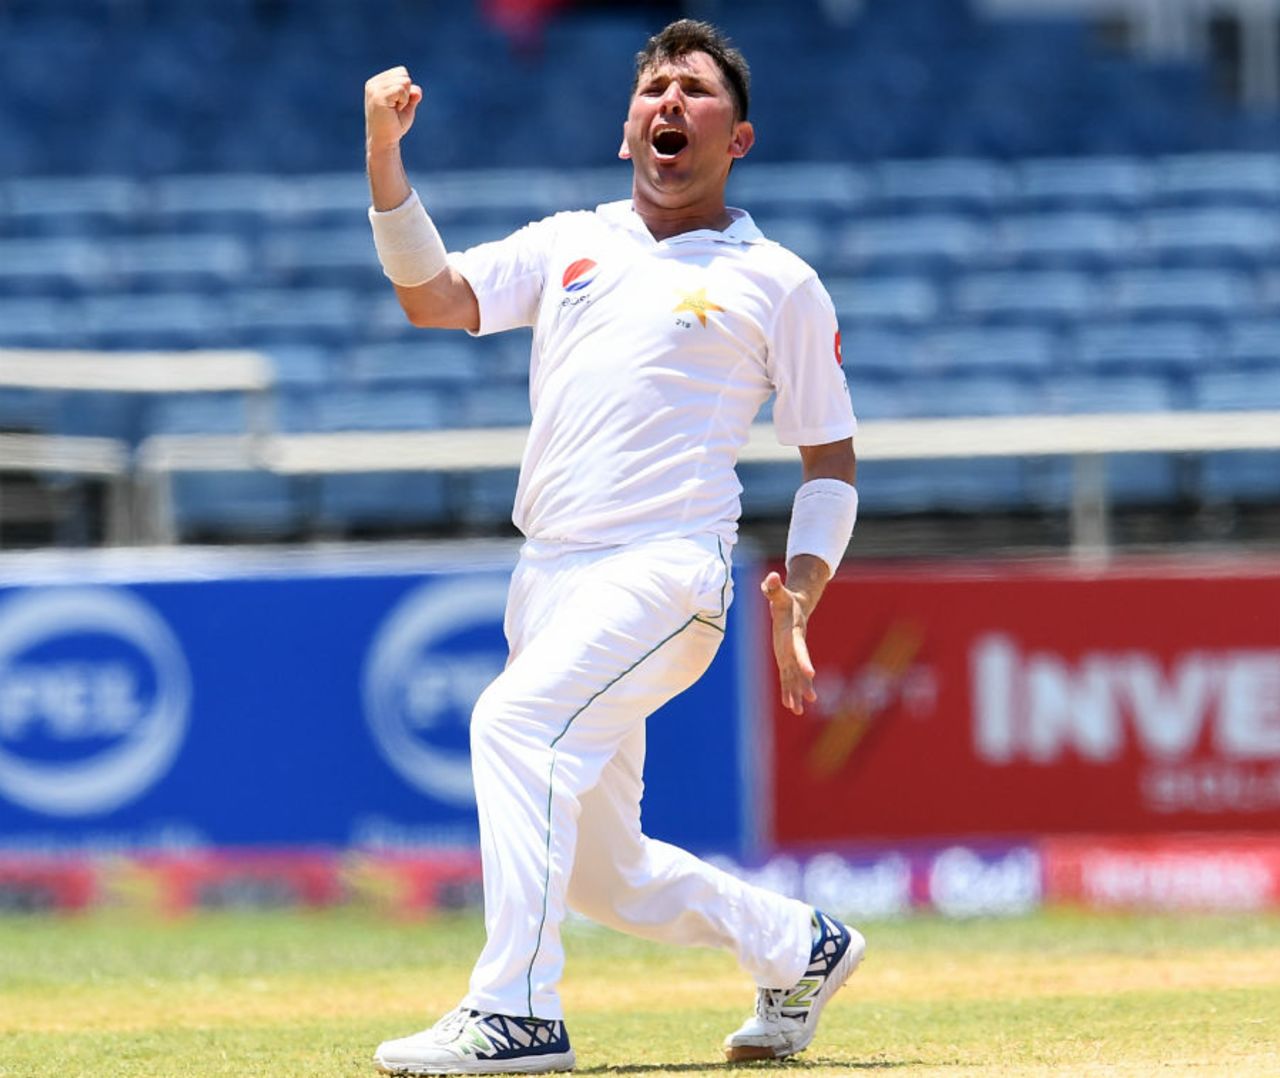 Yasir Shah celebrates his ninth Test five-for, West Indies v Pakistan, 1st Test, Jamaica, 5th day, April 25, 2017